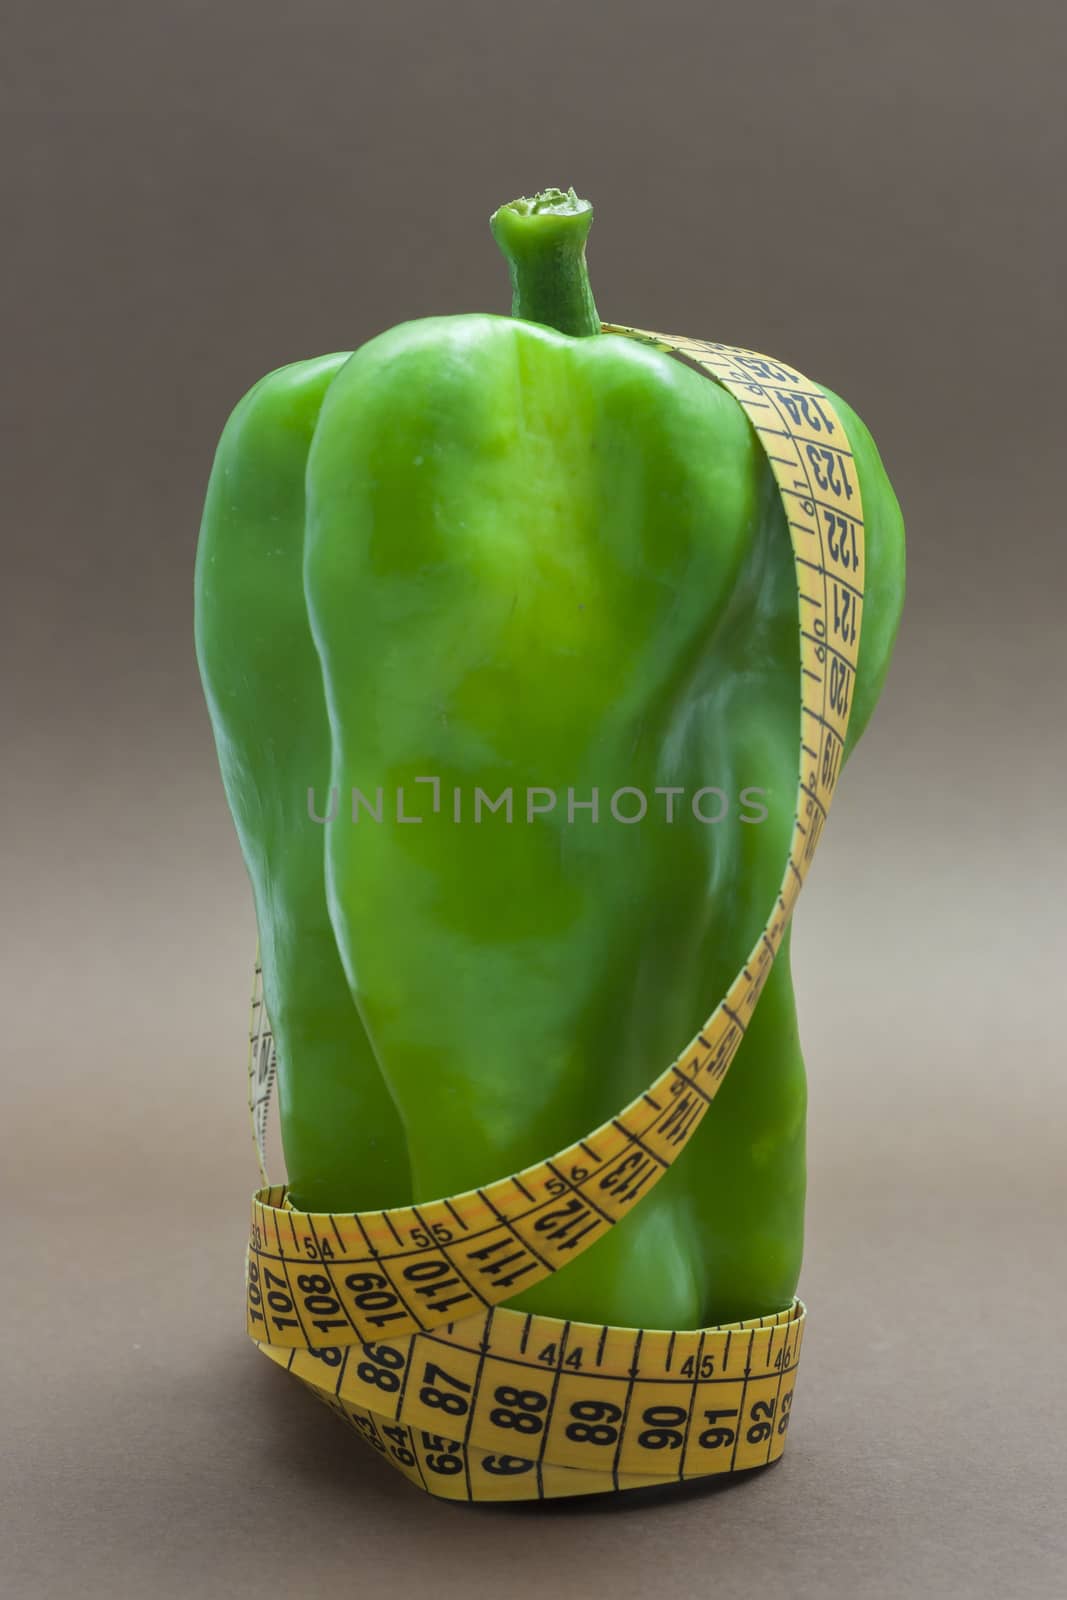 Green pepper isolated on a brown background to understand a concept to healthy eating